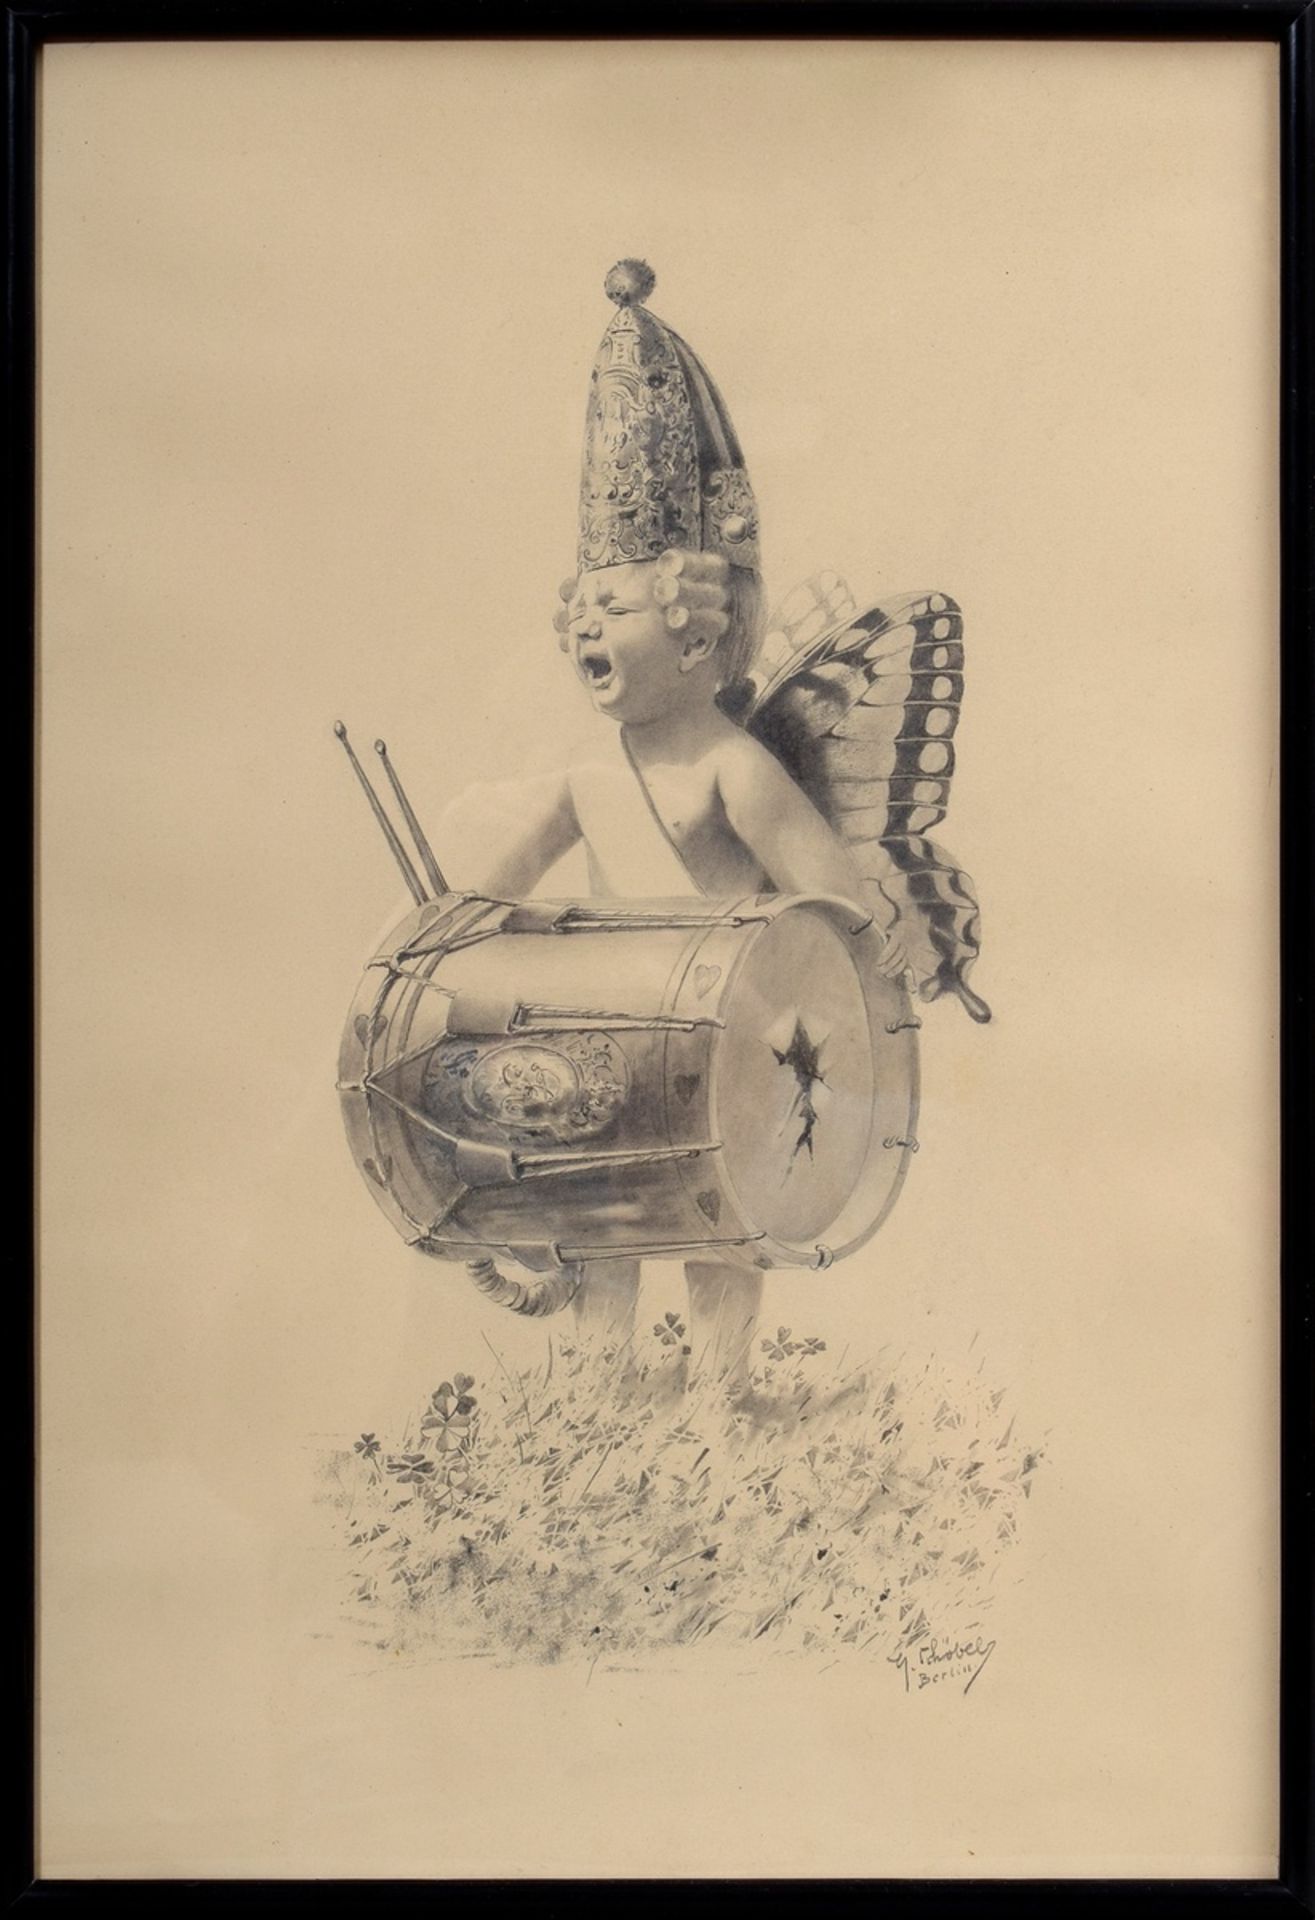 Schöbel, Georg (1860-1941) "Weeping Putto as a Frederician Drummer in a Lucky Clover", pencil/paper